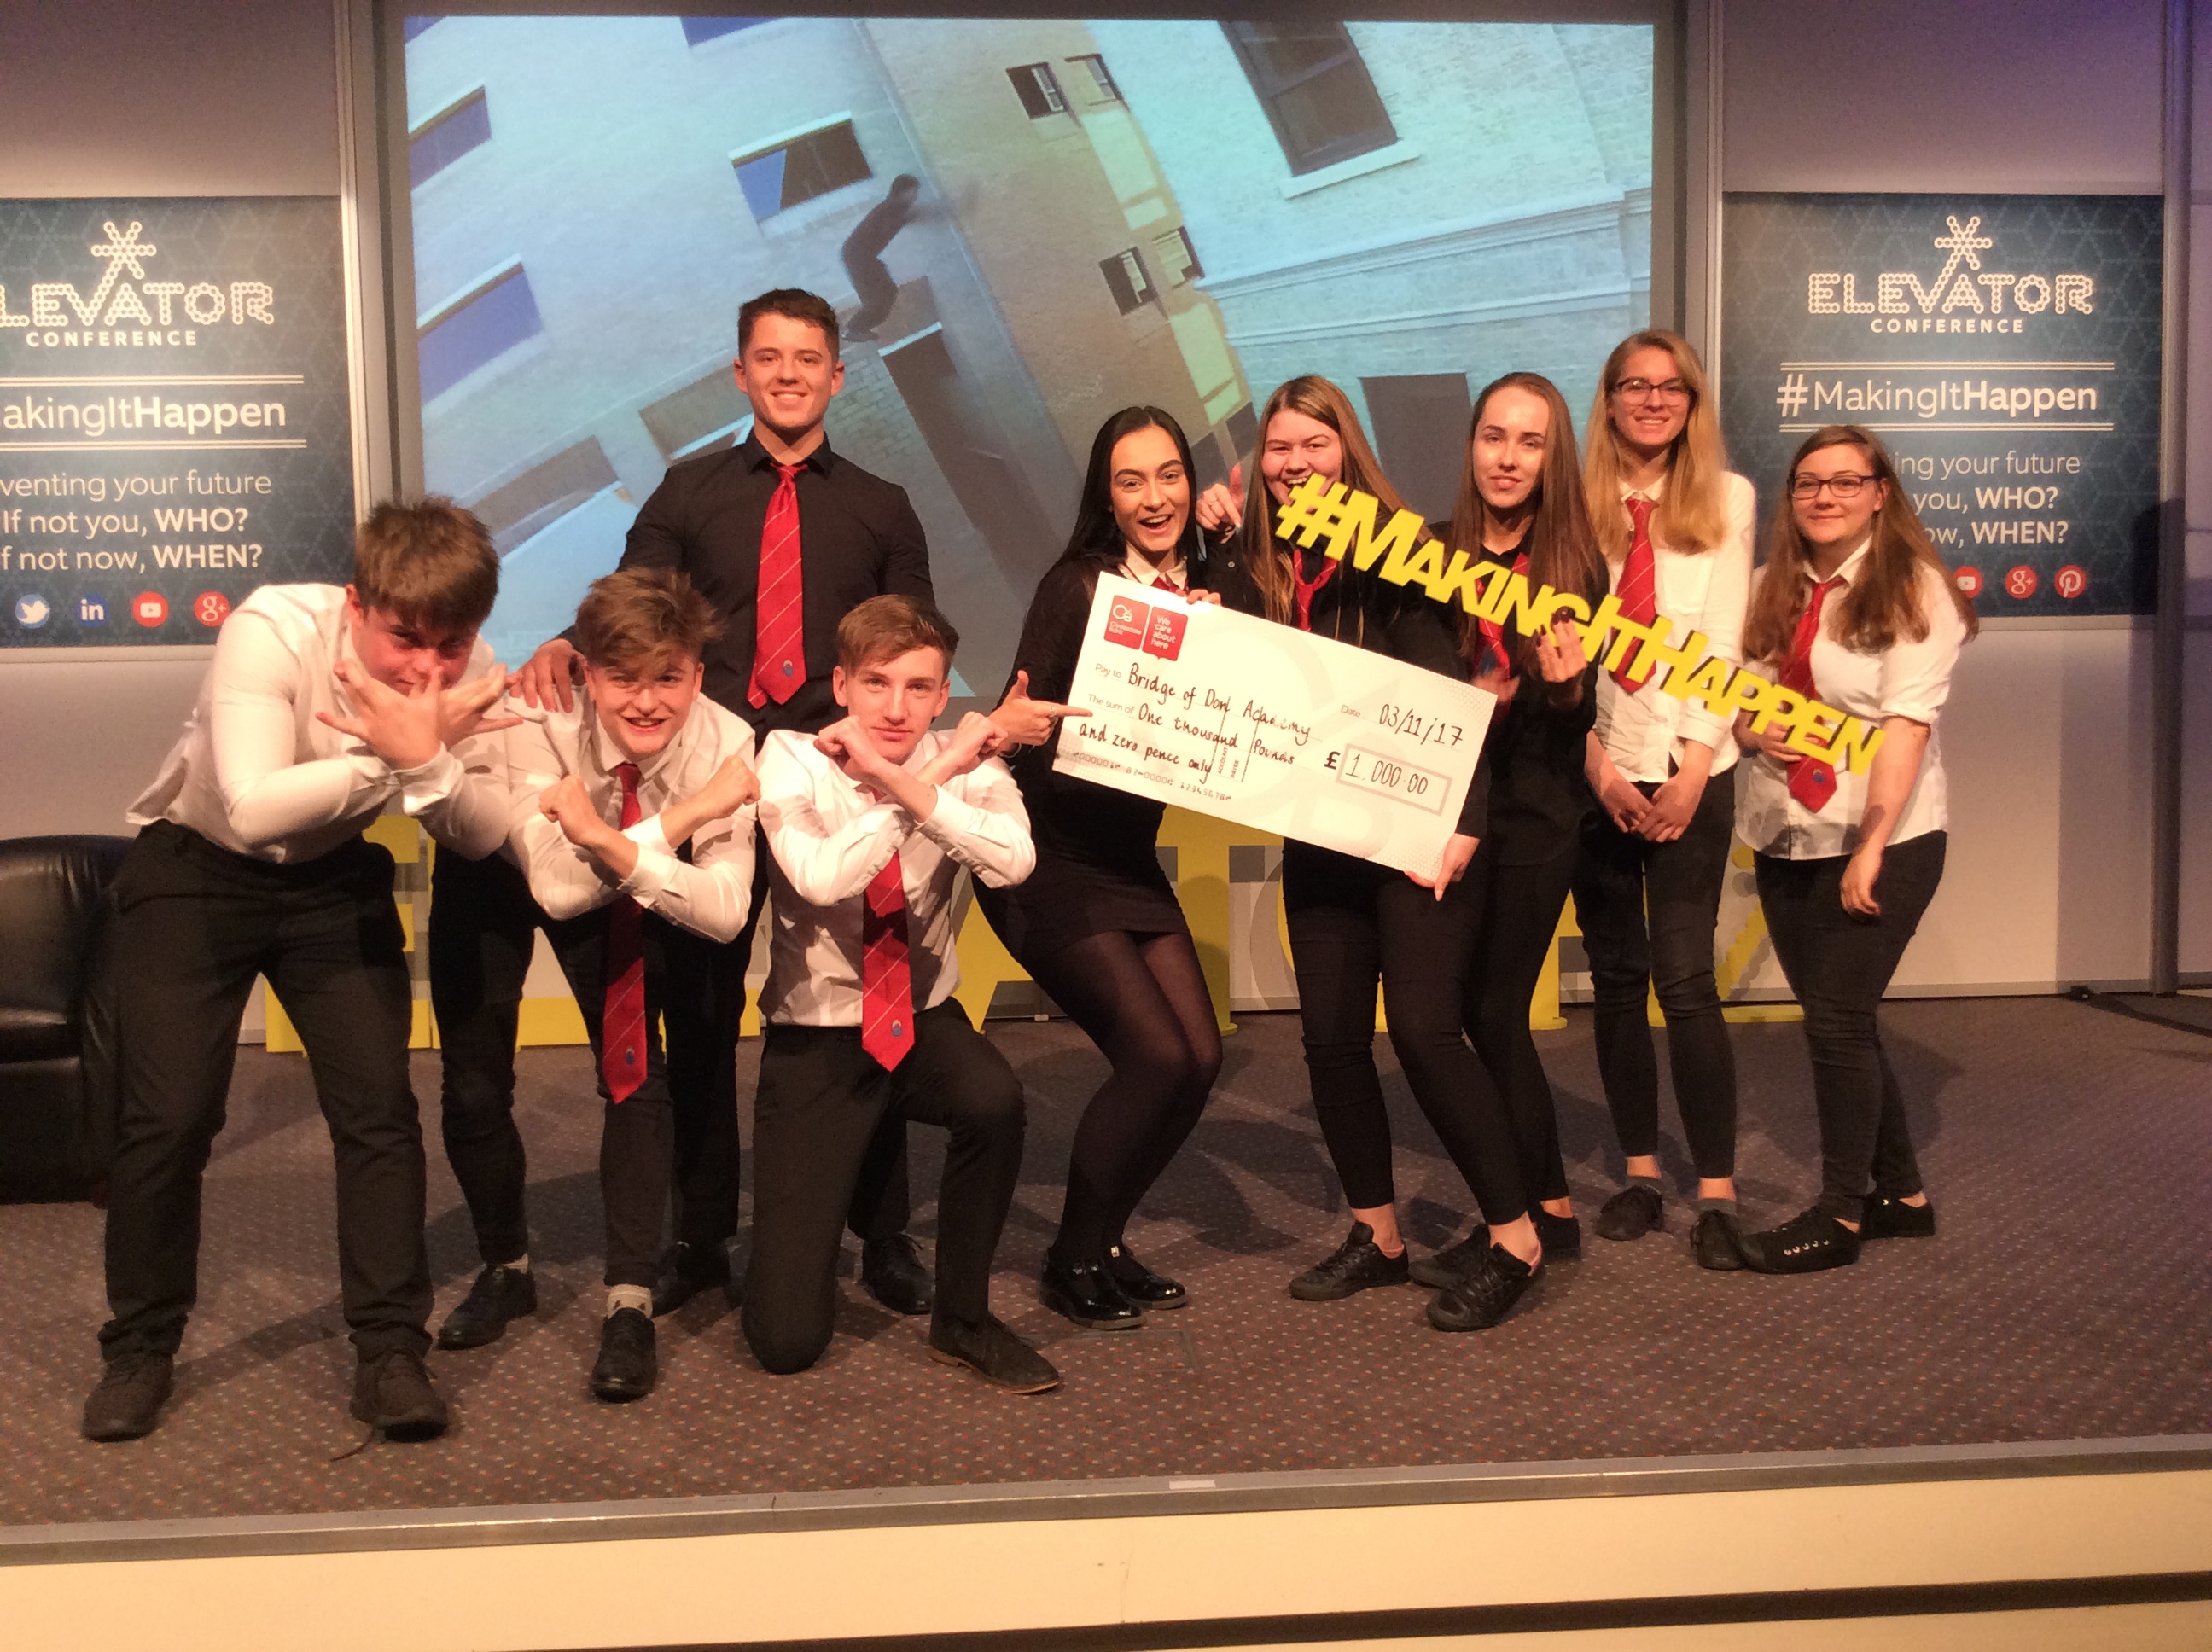 S6 Leaders pitch to win £1000